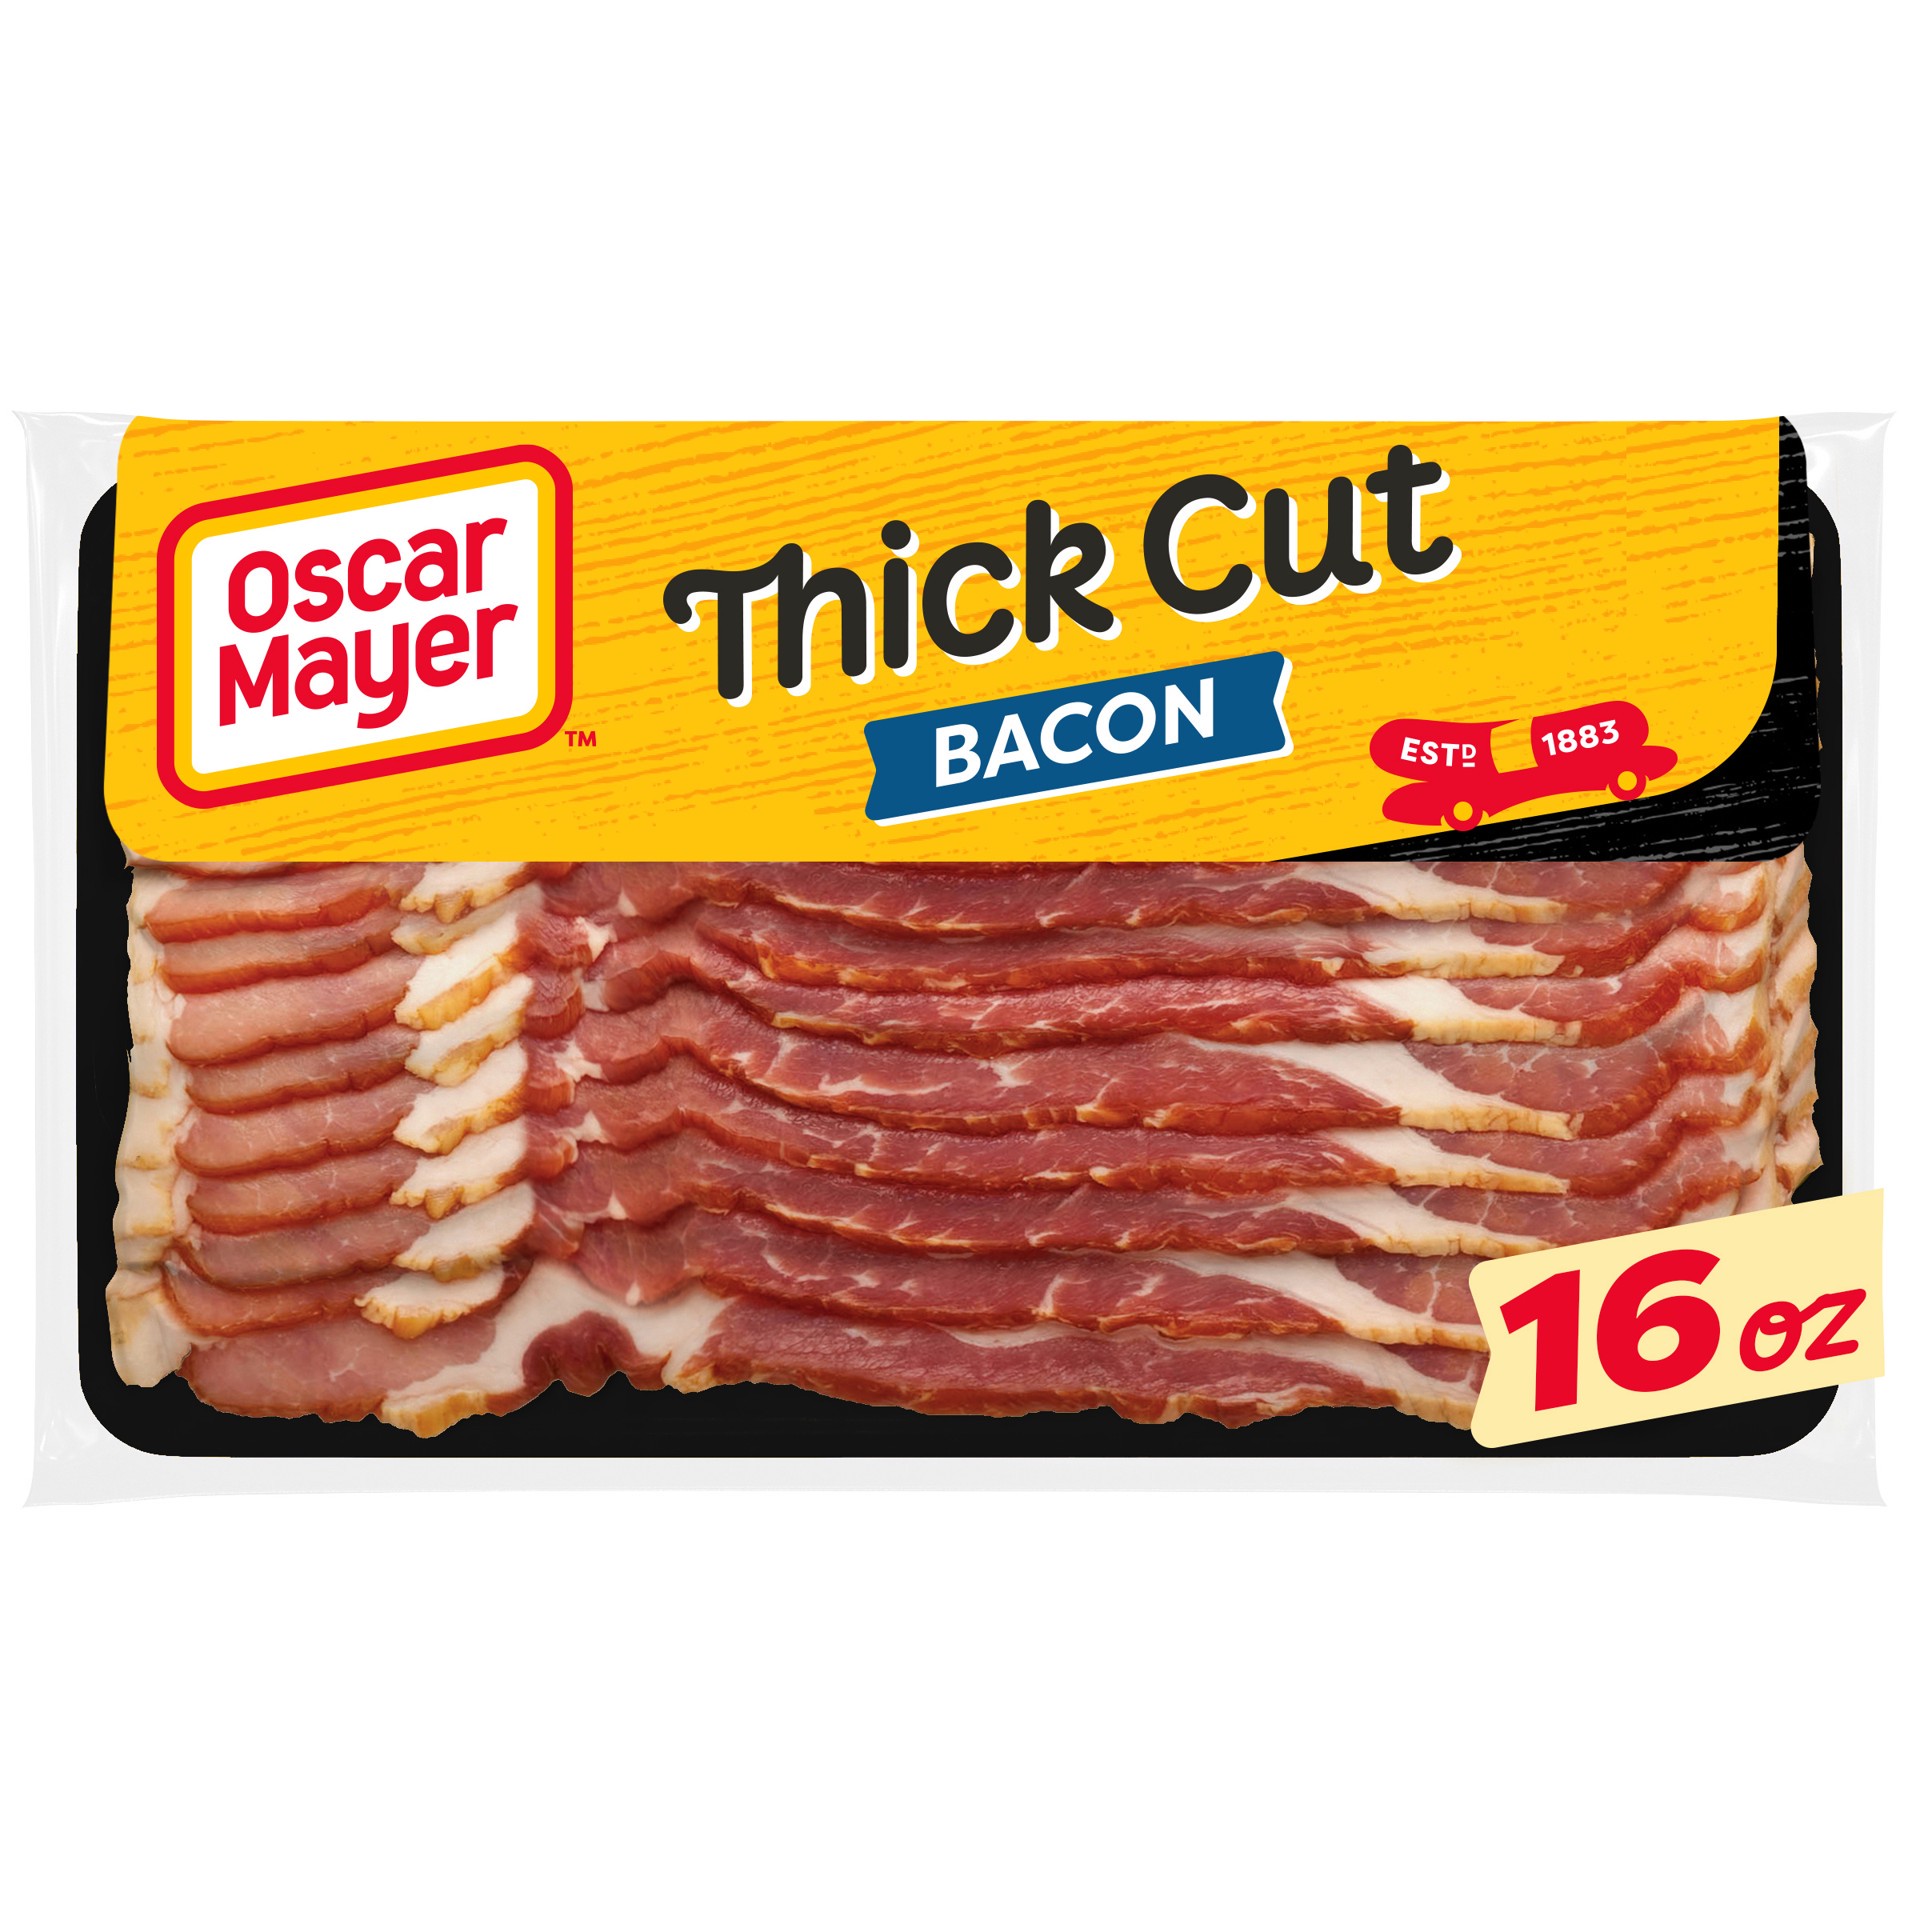 slide 1 of 15, Oscar Mayer Naturally Hardwood Smoked Thick Cut Bacon, 16 oz Pack, 11-13 slices, 16 oz